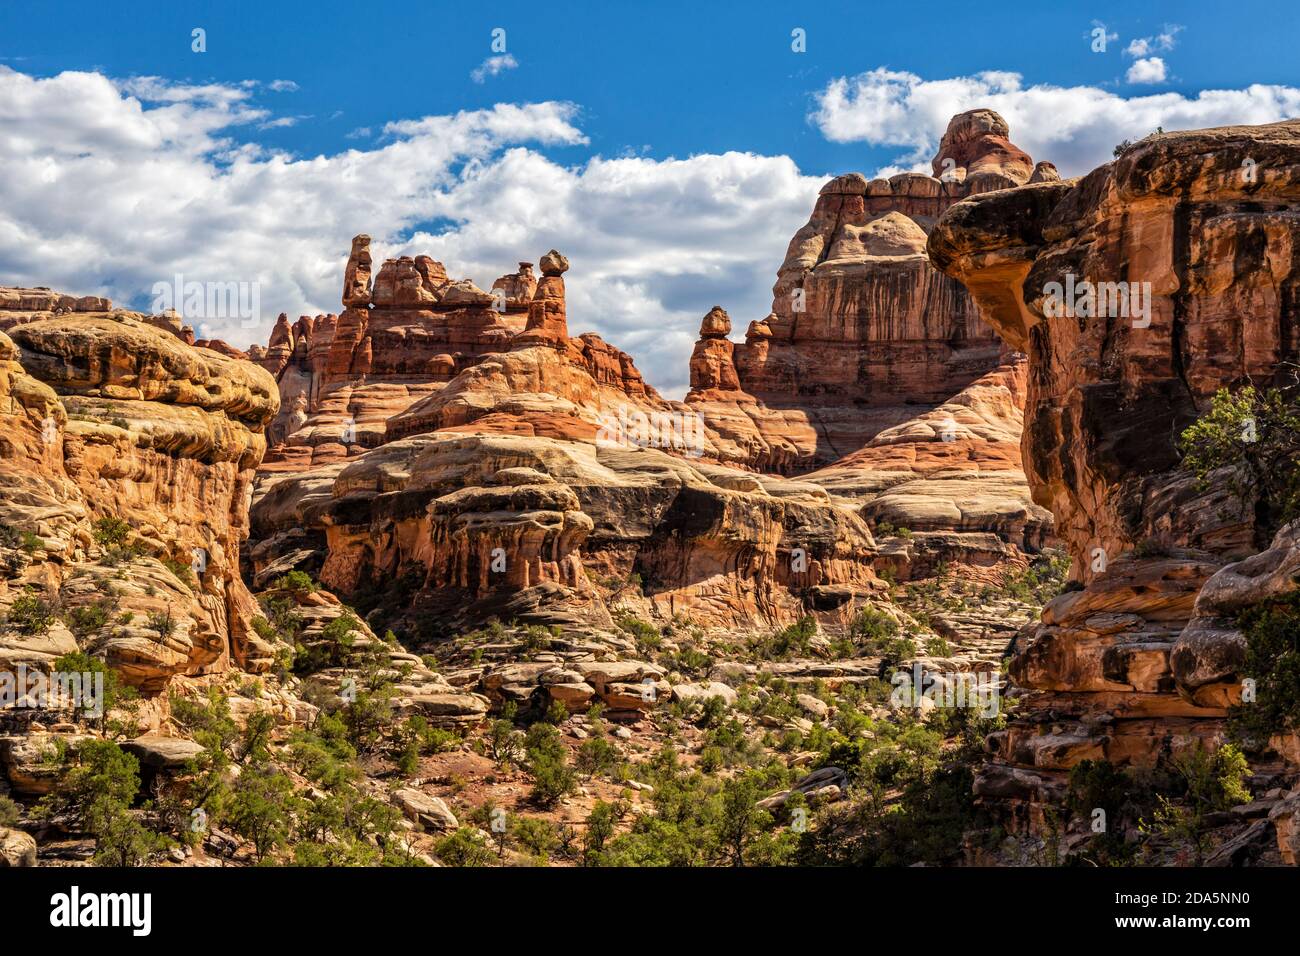 Spires and rock faces line beautiful Elephant Canyon in the Needles District of Canyonlands National Park, Utah. Stock Photo